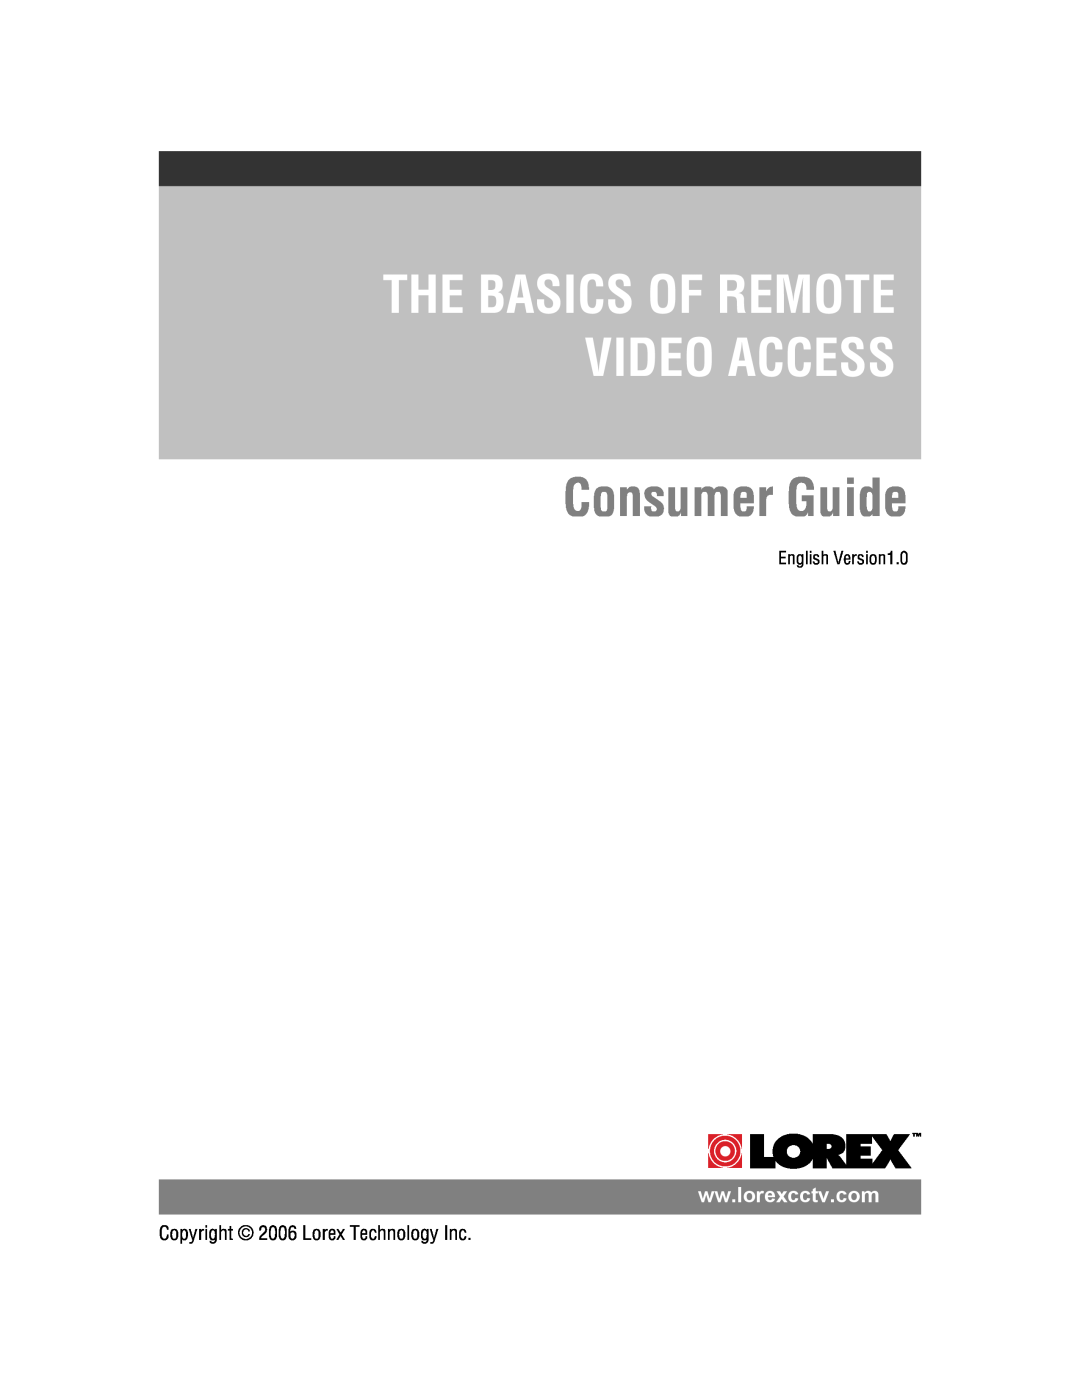 LOREX Technology Surveillance Systems manual The Basics Of Remote Video Access, Consumer Guide 